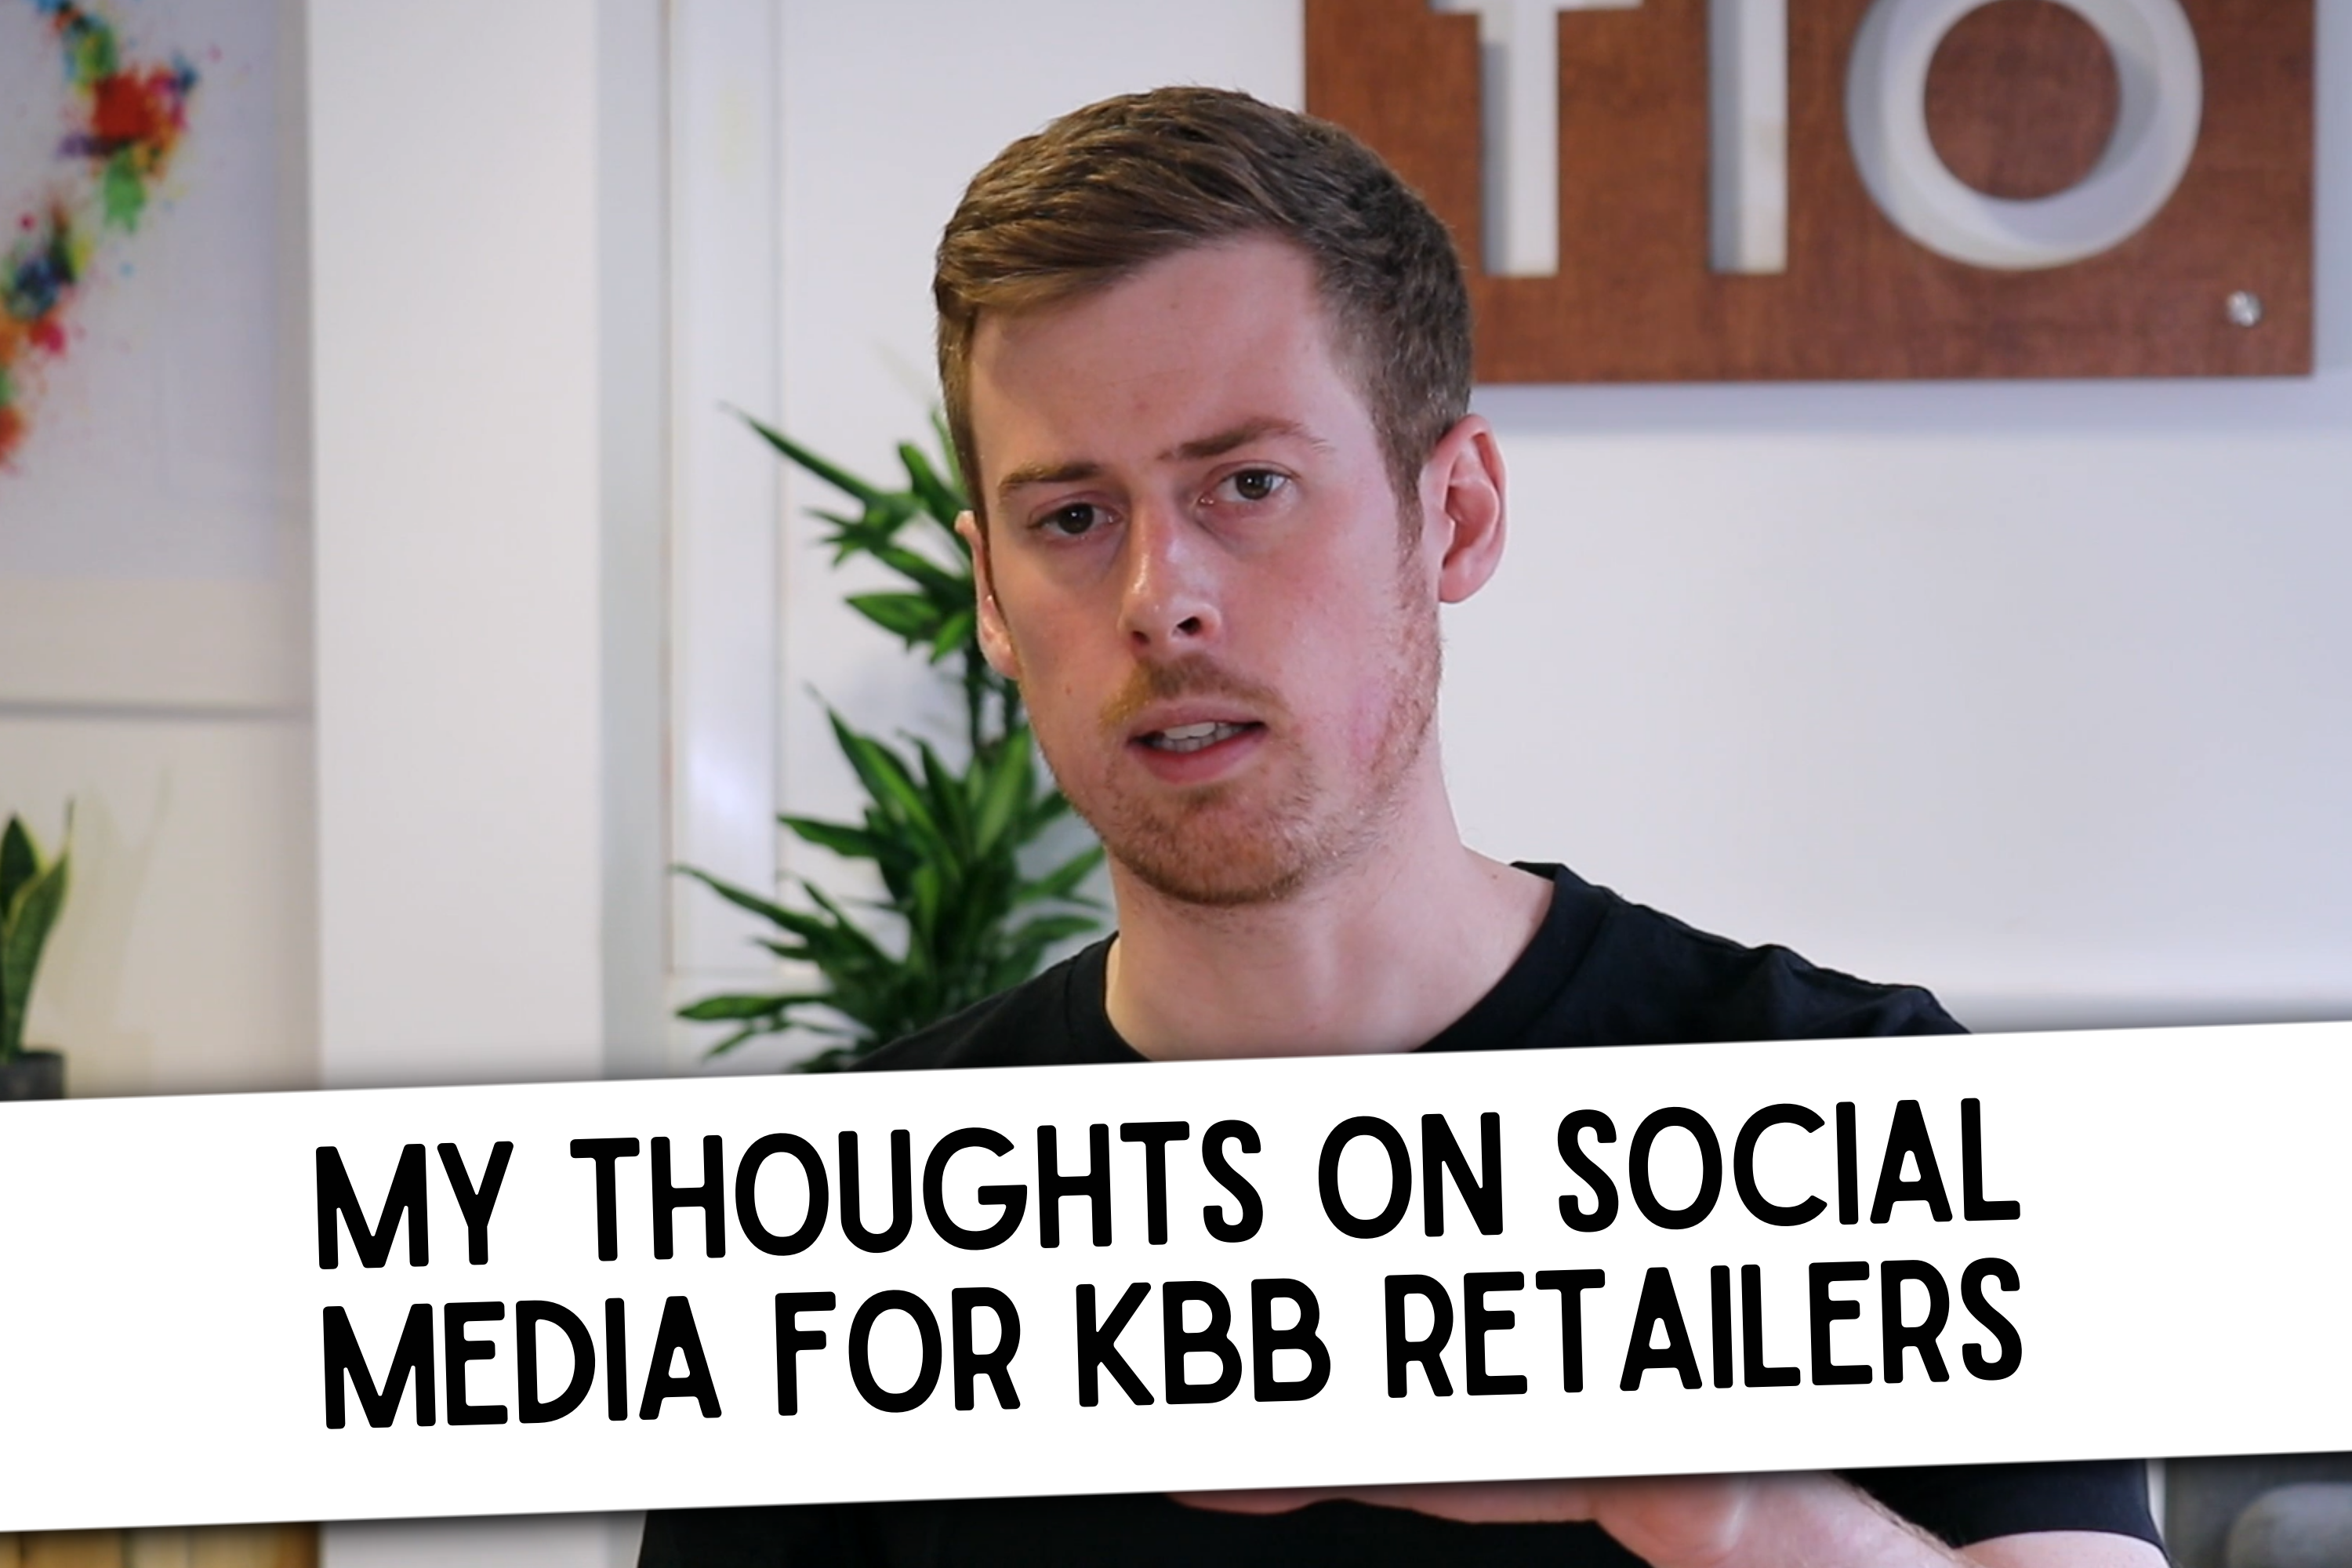 Thoughts on social media for kitchen retailers